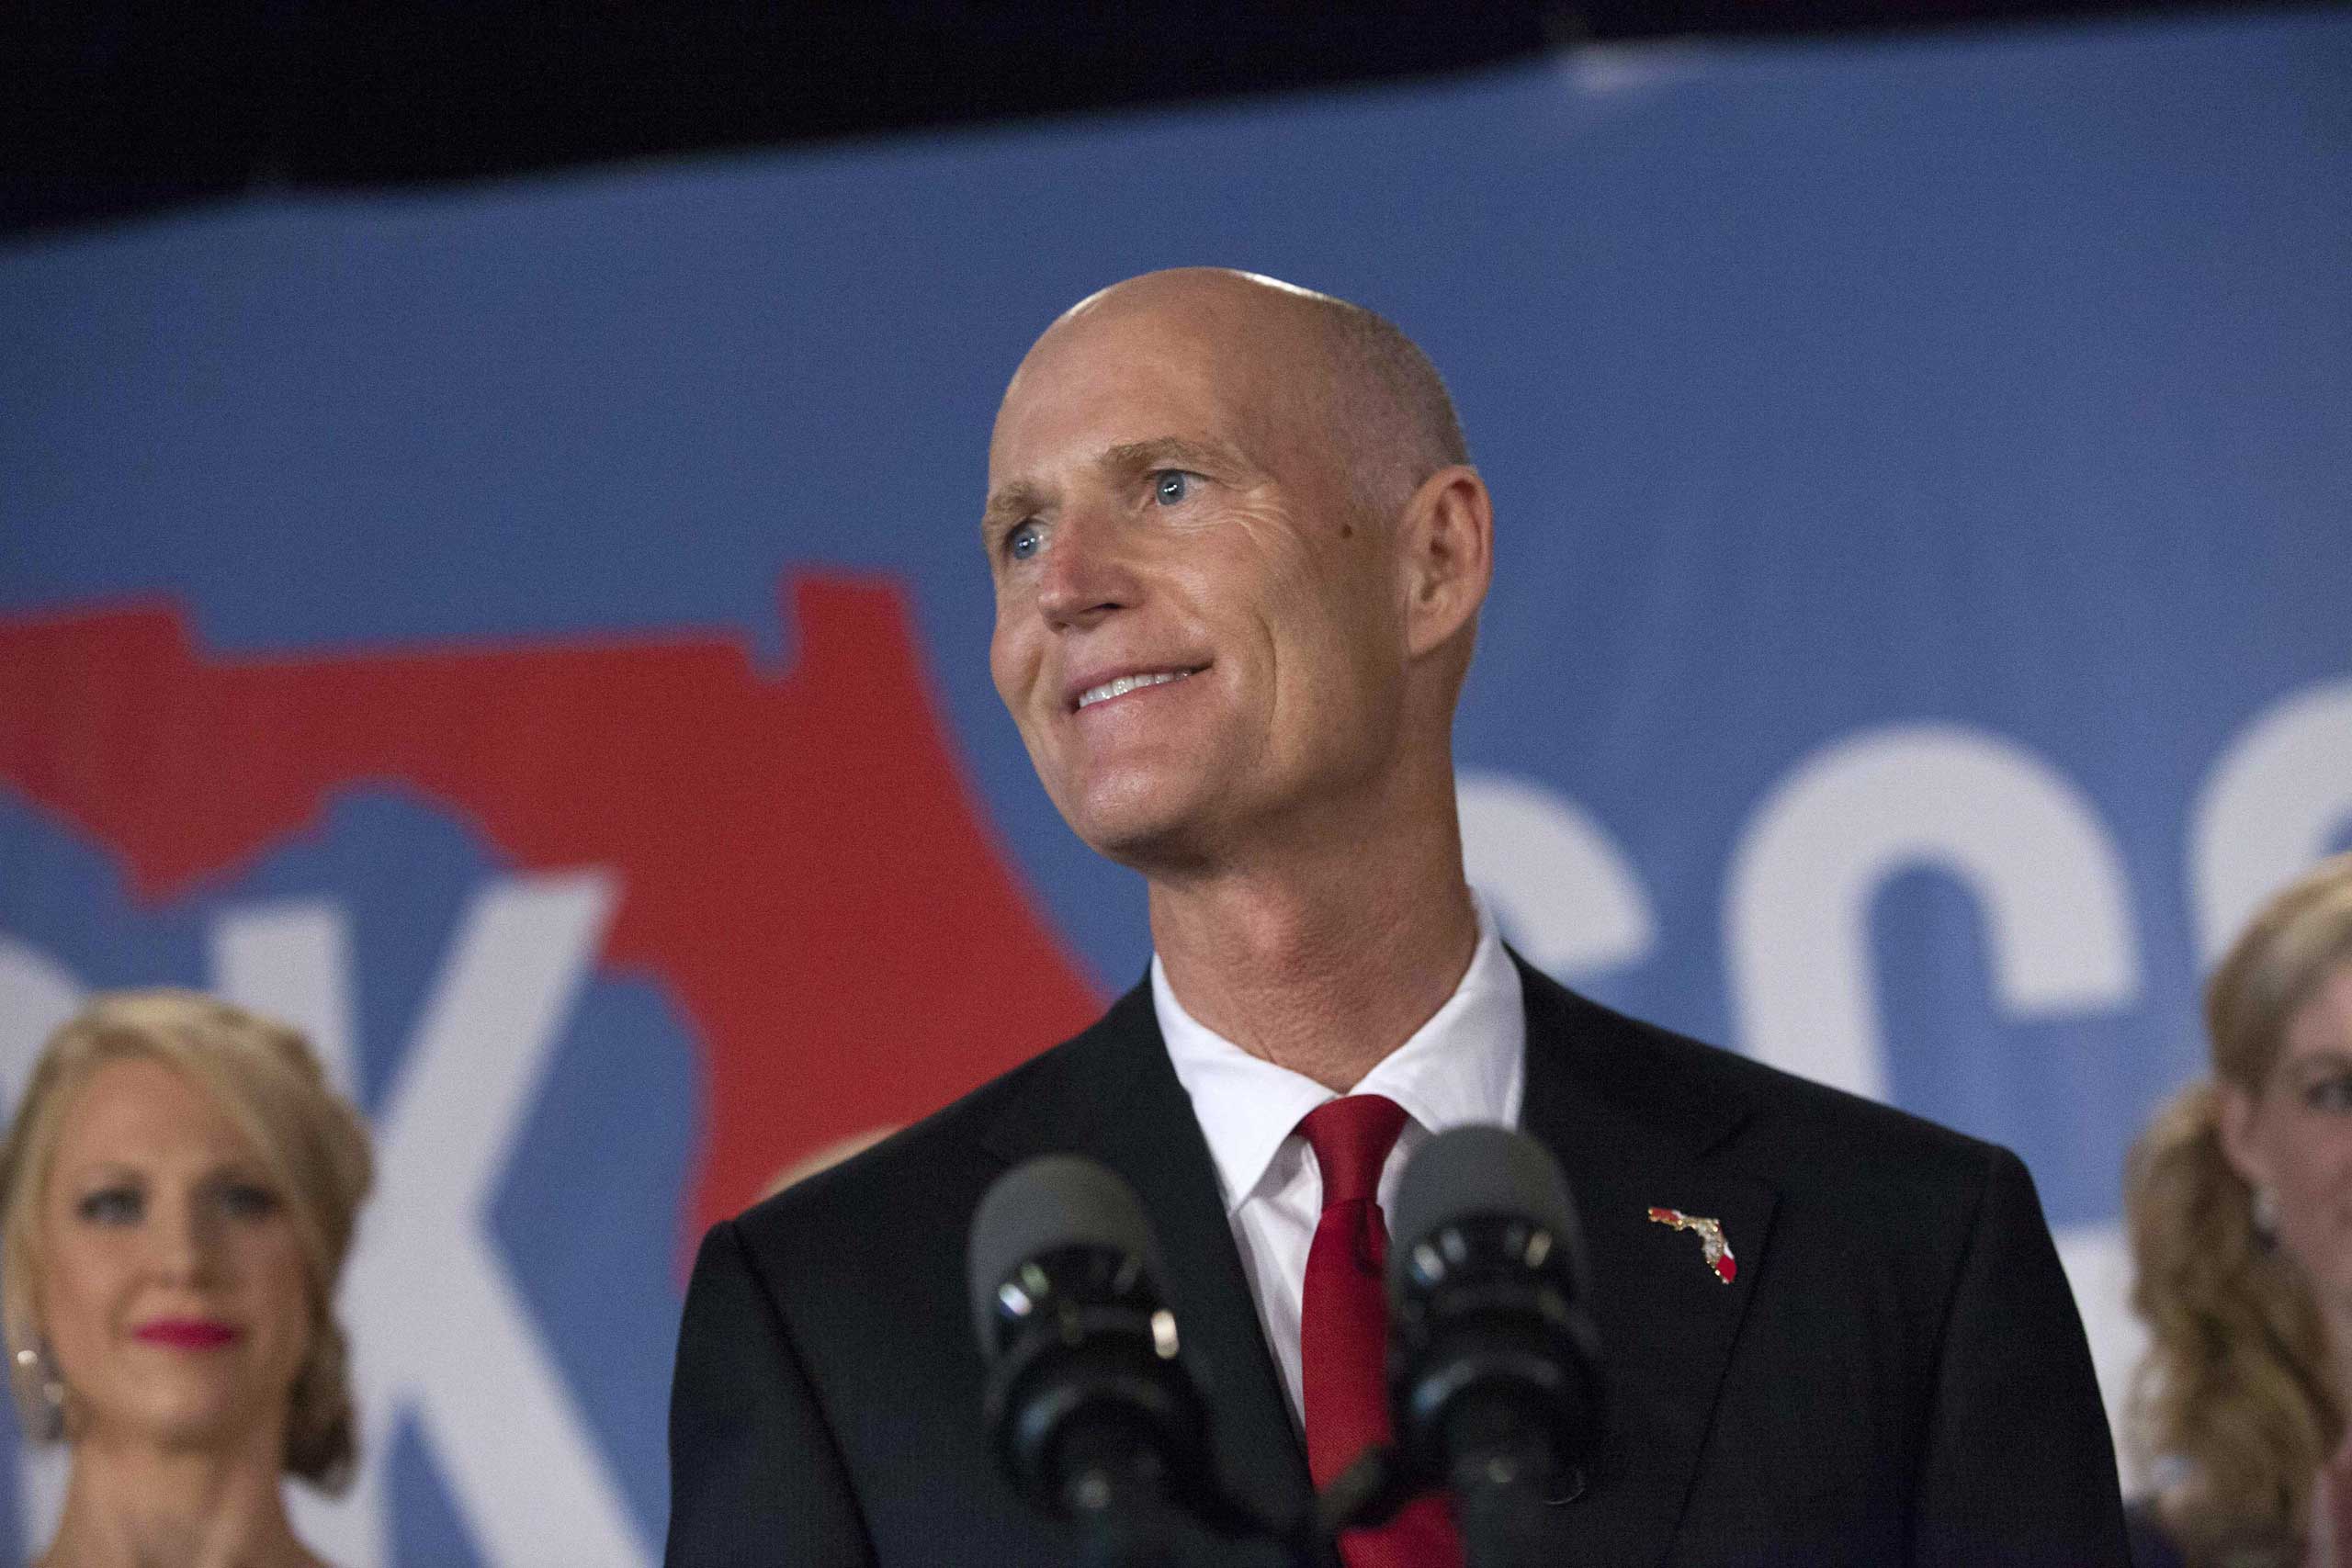 Gov. Rick Scott Gathers With Supporters On Election Night